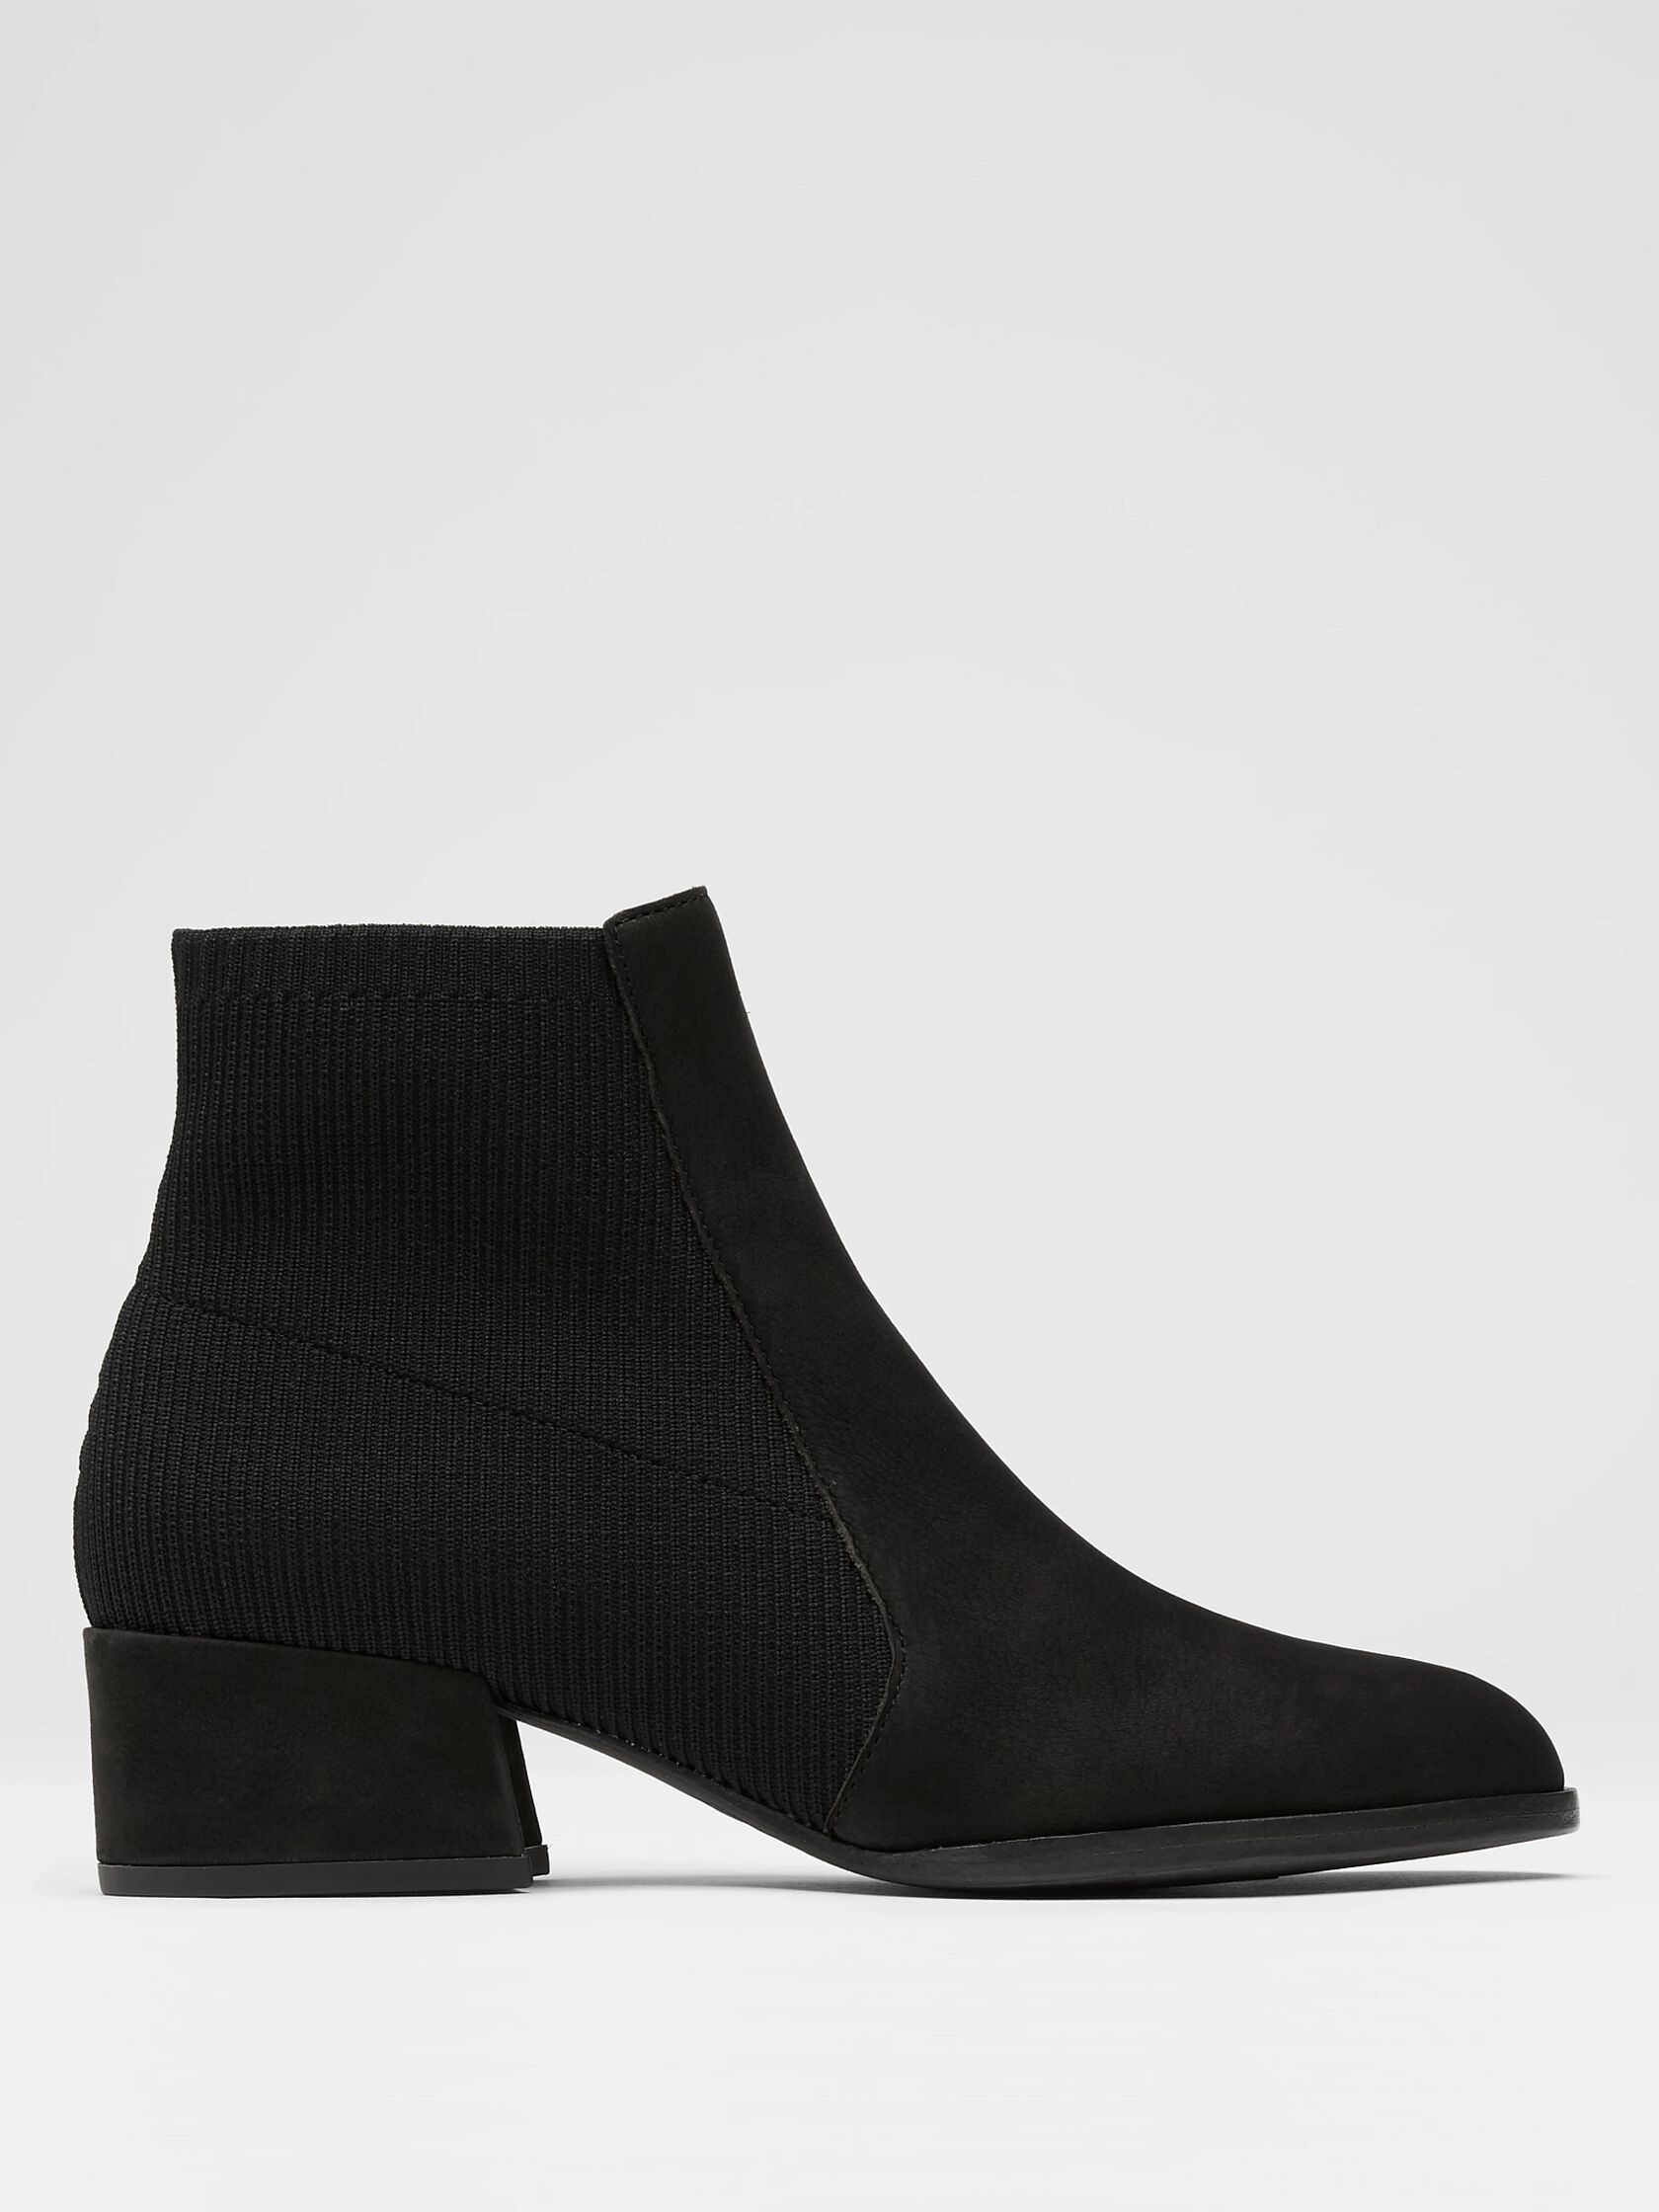 Aesop Tumbled Nubuck and Recycled Stretch Knit Bootie